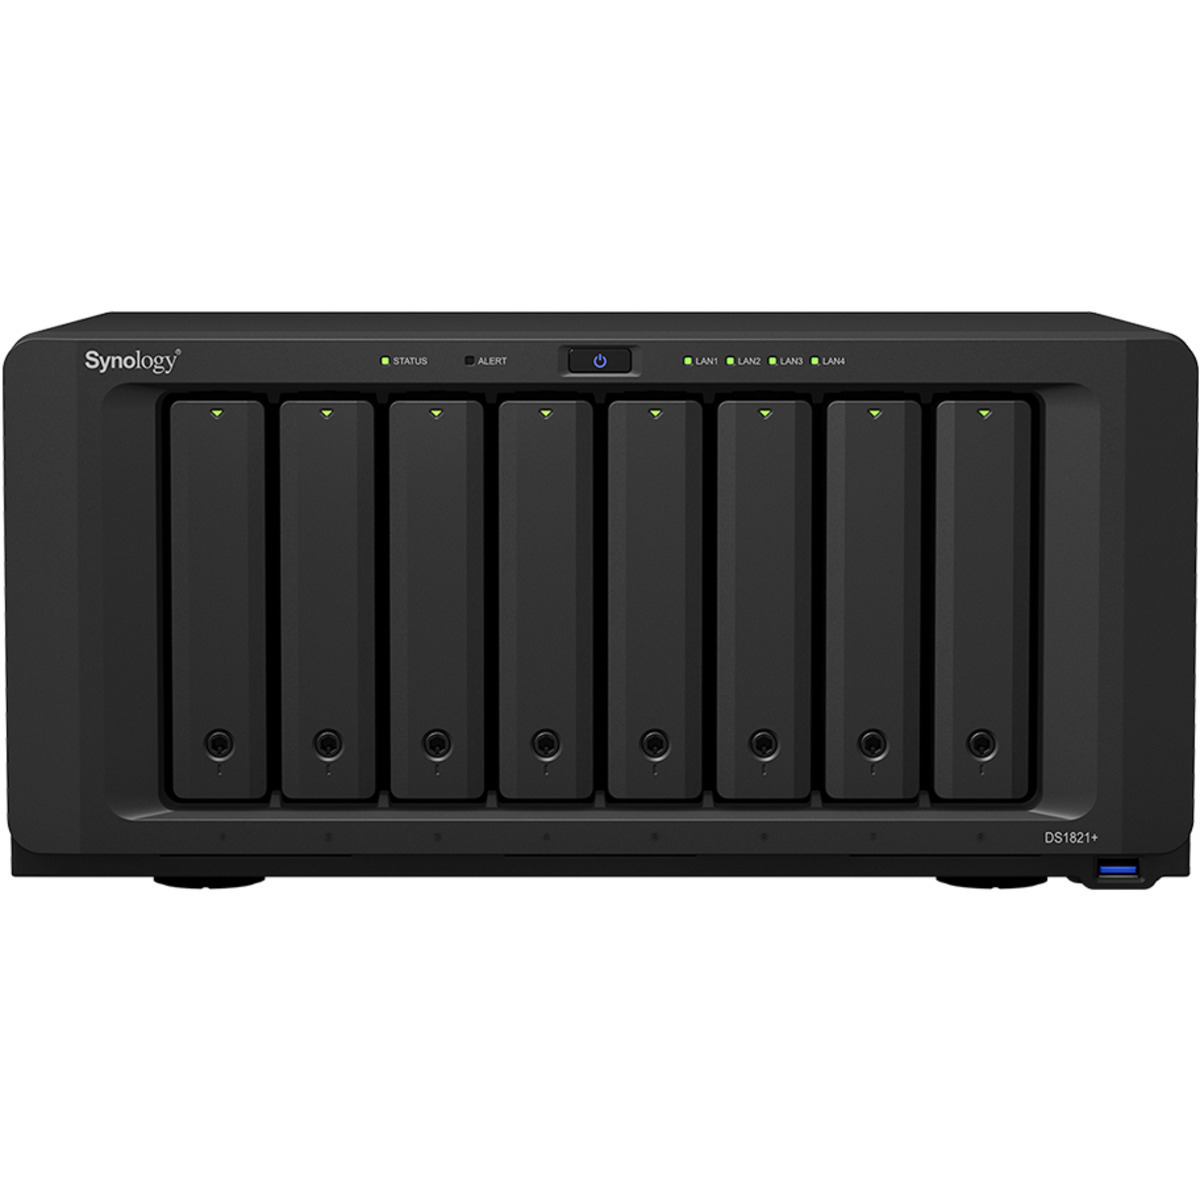 buy Synology DiskStation DS1821+ 96tb Desktop NAS - Network Attached Storage Device 8x12000gb Seagate IronWolf Pro ST12000NT001 3.5 7200rpm SATA 6Gb/s HDD NAS Class Drives Installed - Burn-In Tested - ON SALE - FREE RAM UPGRADE - nas headquarters buy network attached storage server device das new raid-5 free shipping simply usa christmas holiday black friday cyber monday week sale happening now! DiskStation DS1821+